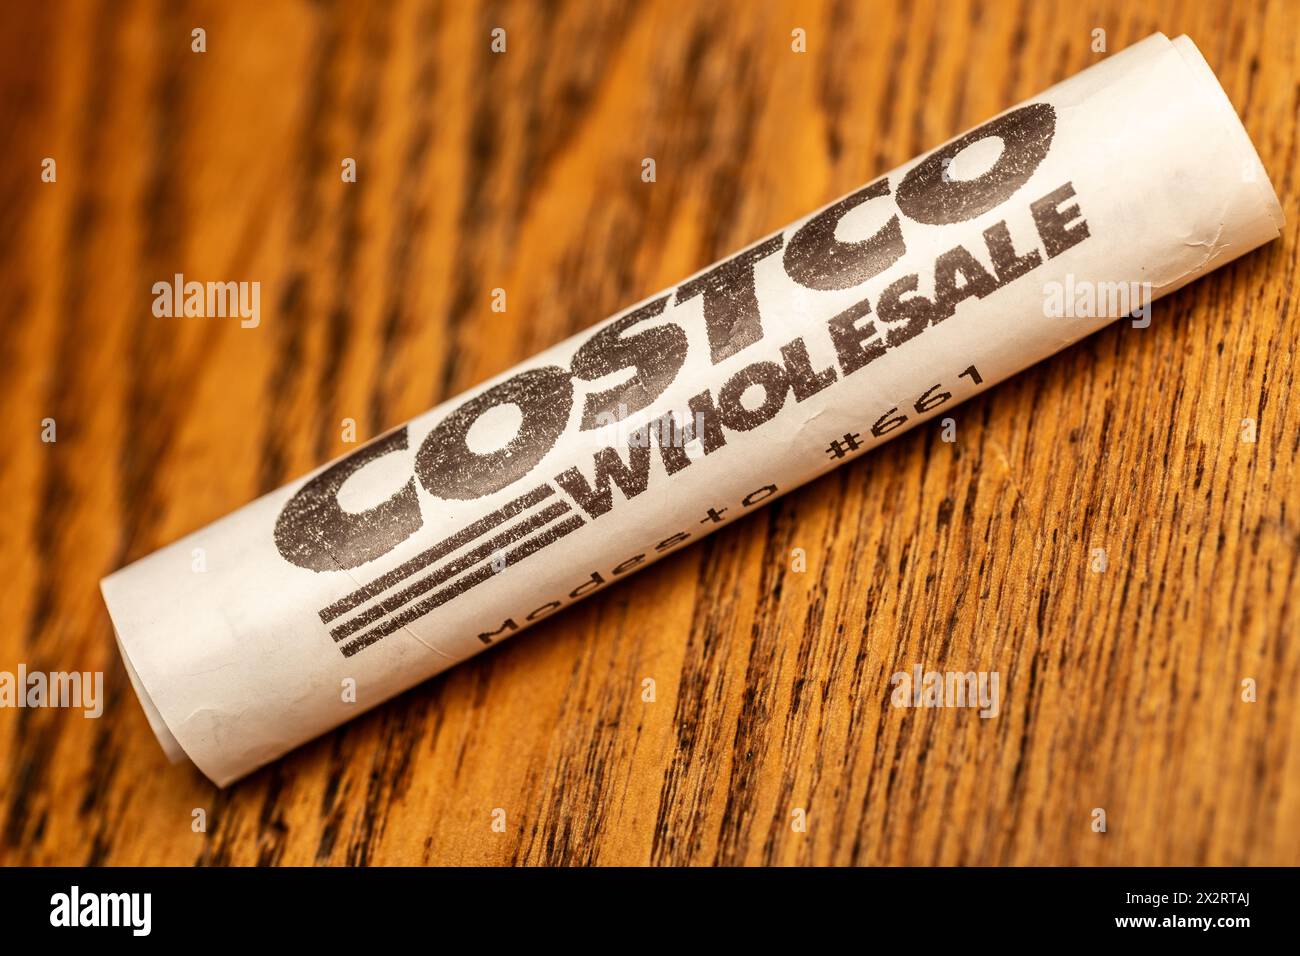 A rolled up Costco Wholesale receipt with logo Stock Photo